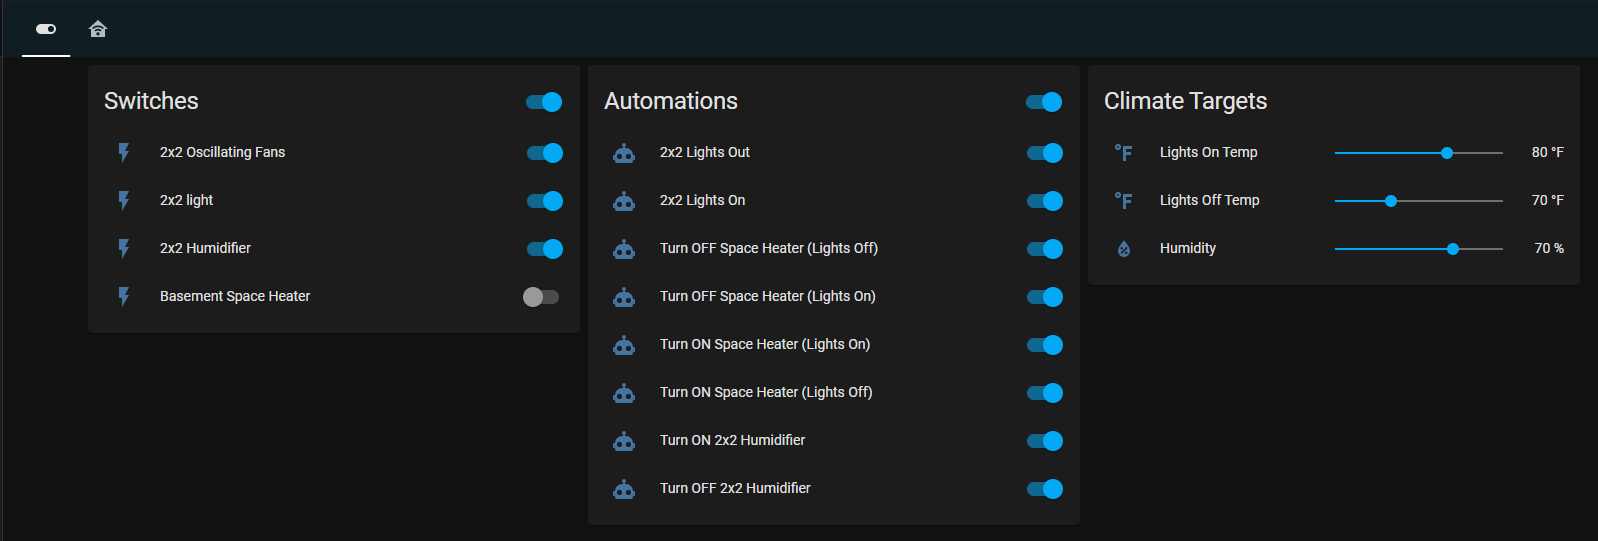 2x2 tent HA switches and automations - Copy.PNG